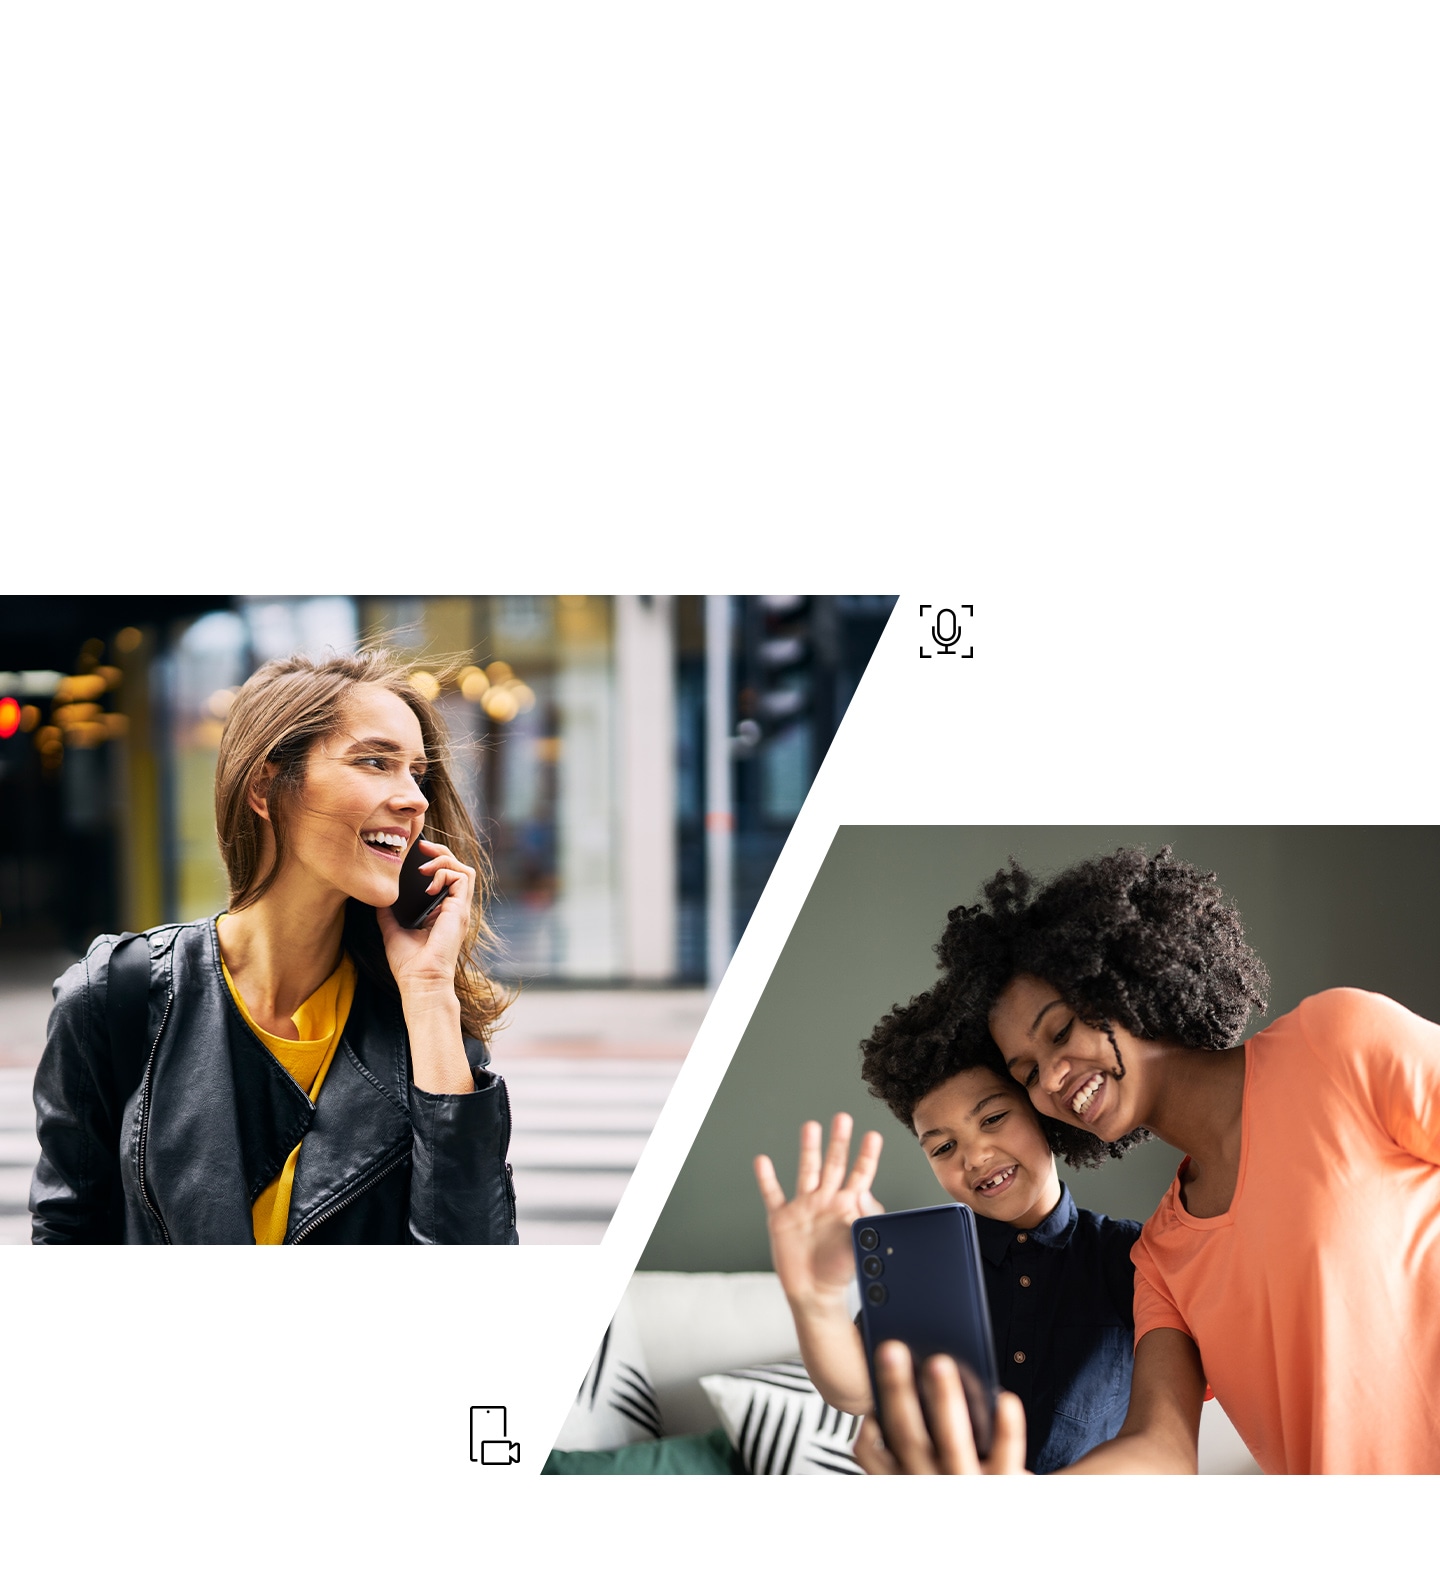 On the left, a woman is walking in the street while talking on the phone. Next to it, the voice call icon is shown. On the right, a mother and her young son are waving at the phone in a group call. Next to it, the video call icon is shown.